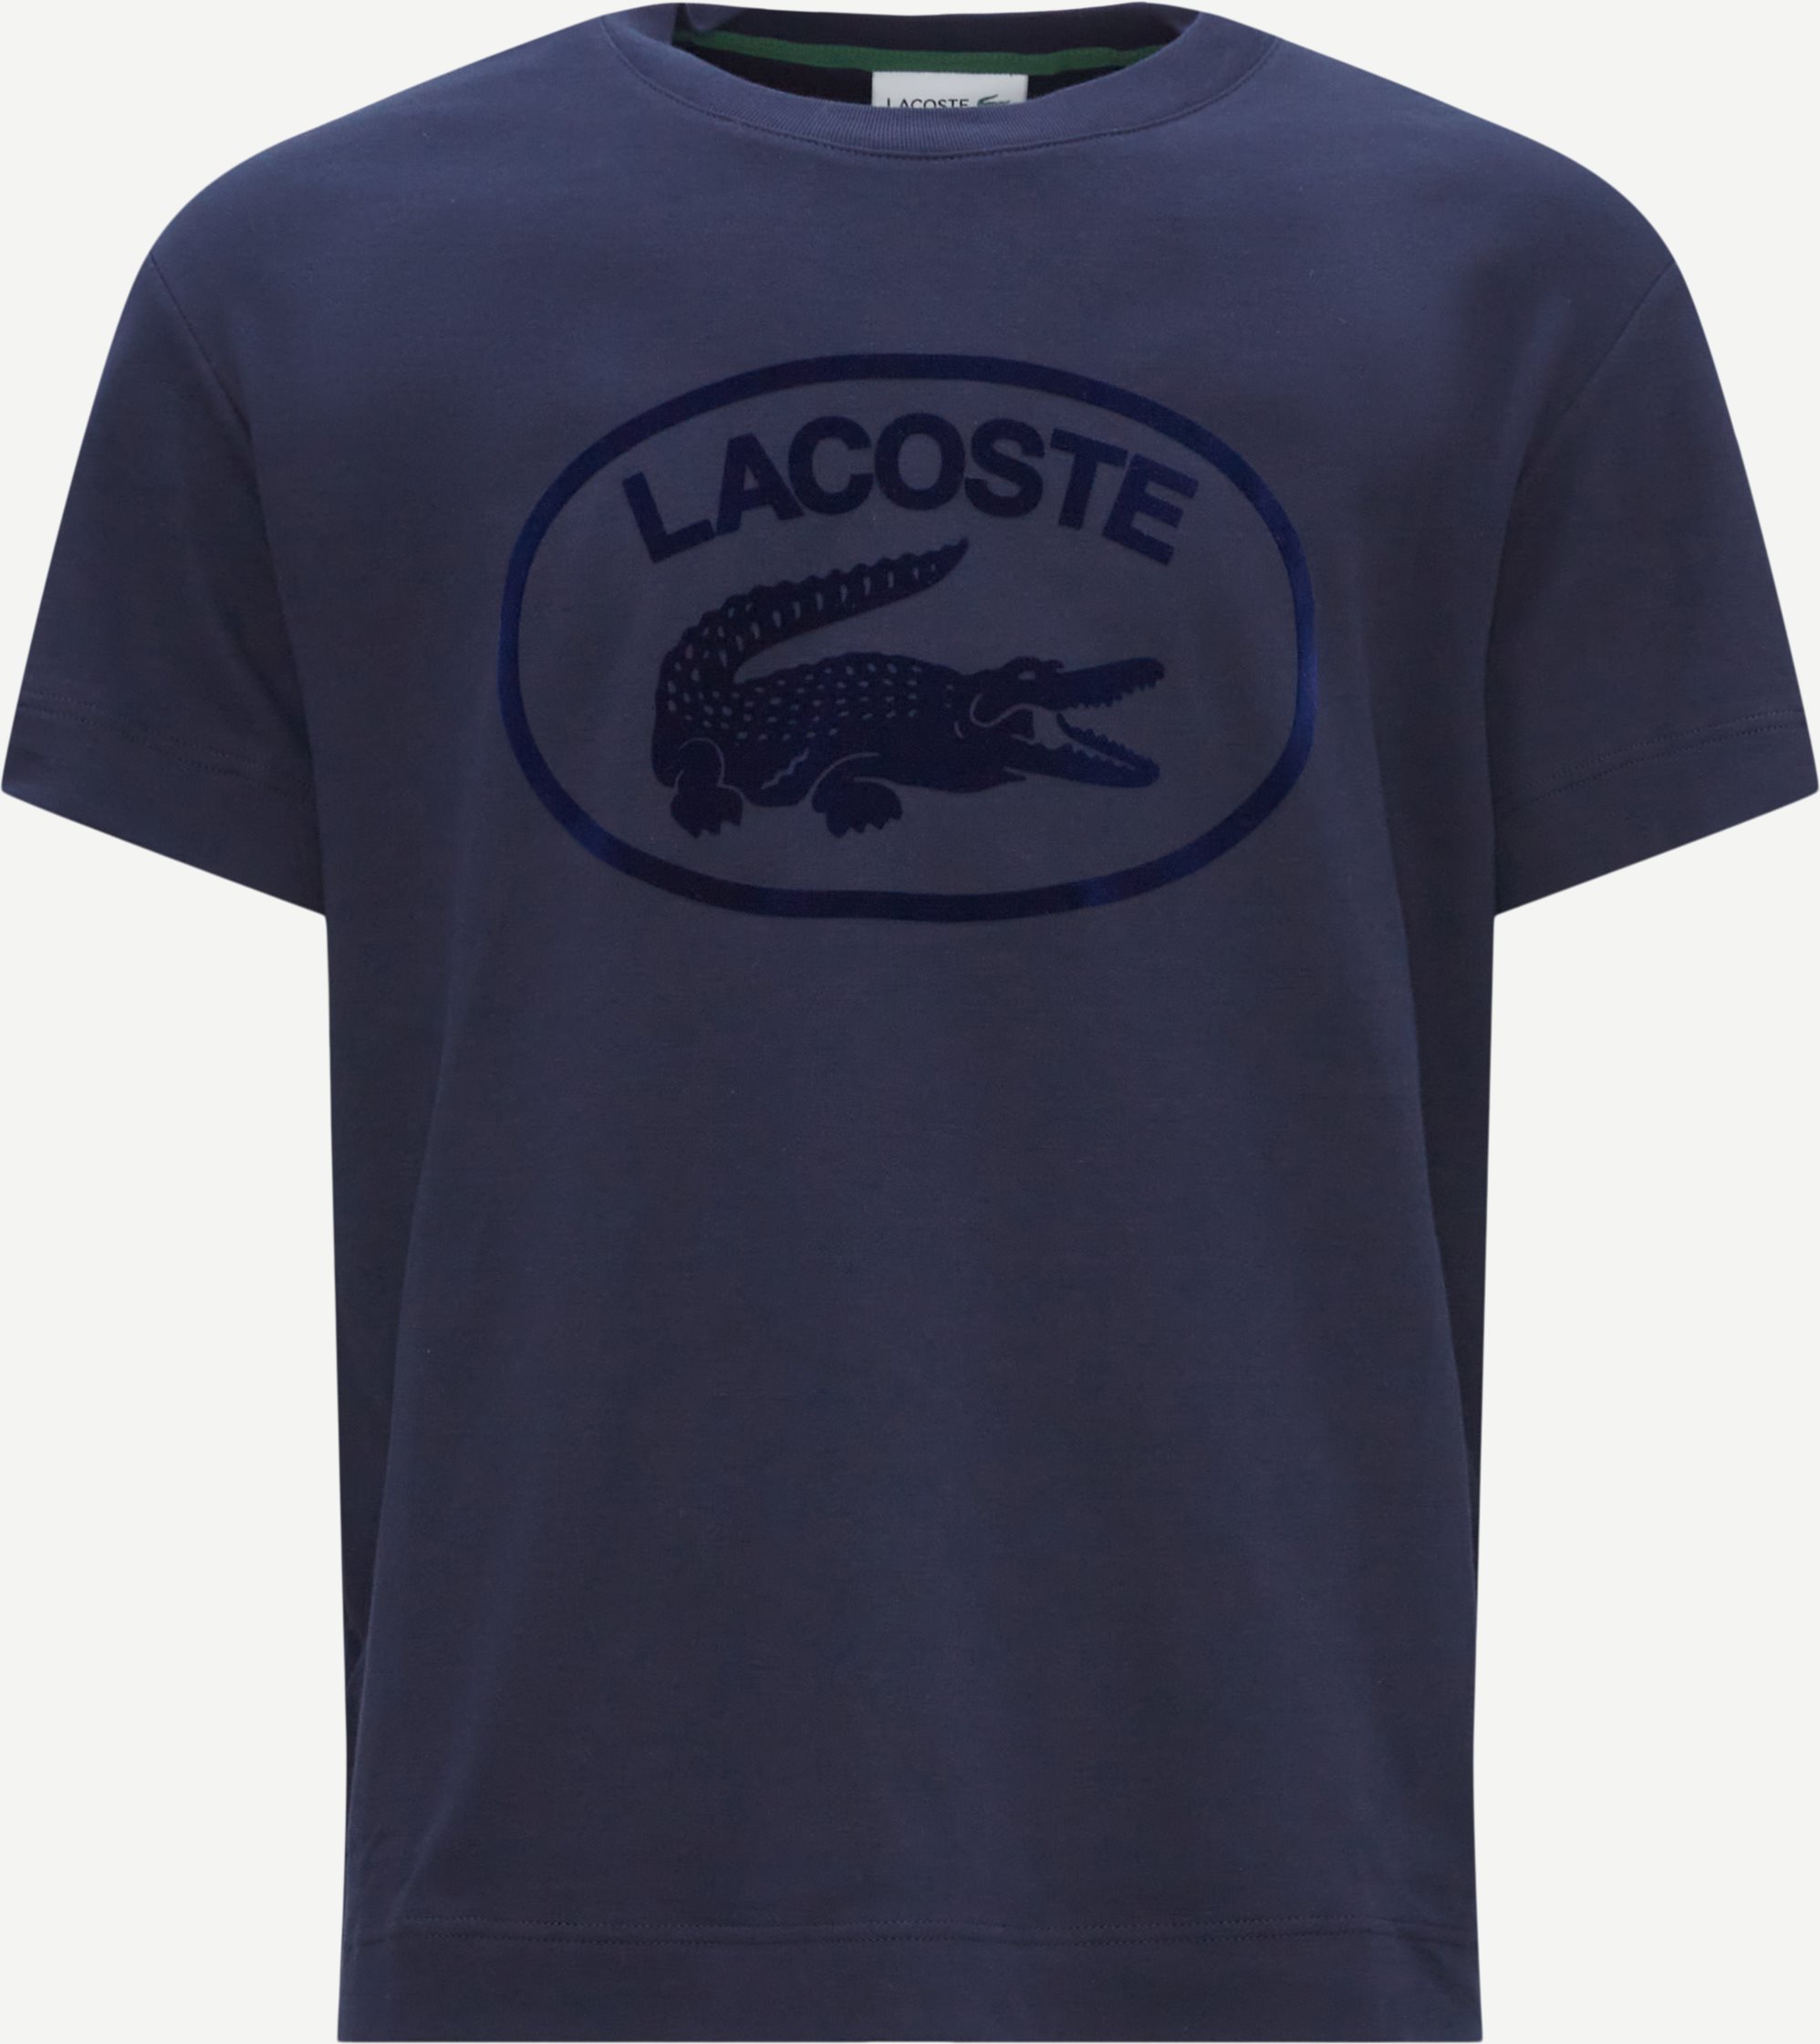 Lacoste T-shirts TH0244 Blue